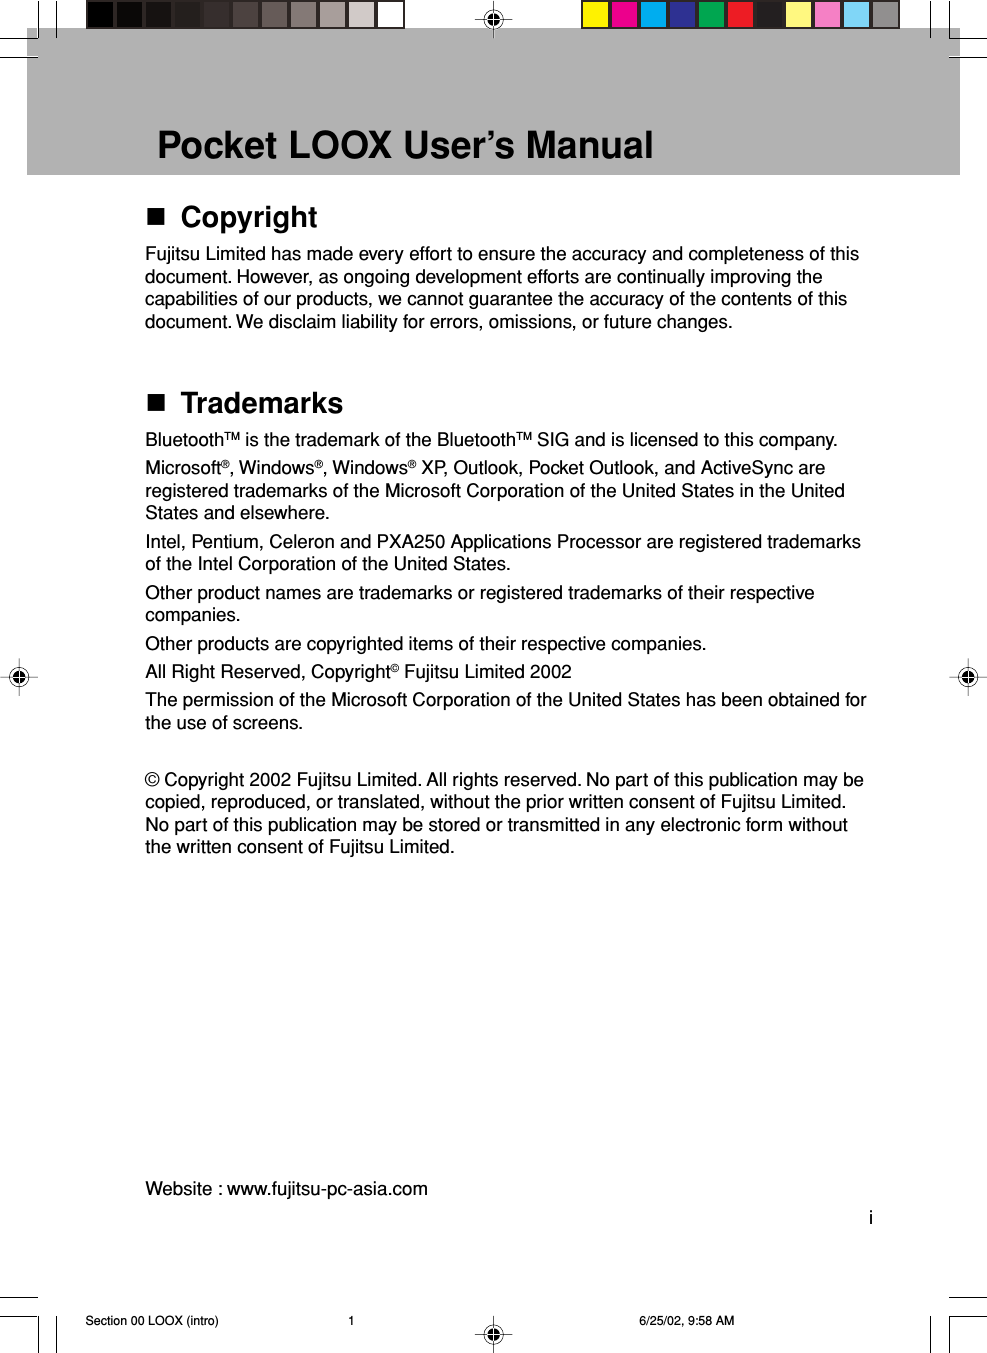 iCopyrightFujitsu Limited has made every effort to ensure the accuracy and completeness of thisdocument. However, as ongoing development efforts are continually improving thecapabilities of our products, we cannot guarantee the accuracy of the contents of thisdocument. We disclaim liability for errors, omissions, or future changes.TrademarksBluetoothTM is the trademark of the BluetoothTM SIG and is licensed to this company.Microsoft®, Windows®, Windows® XP, Outlook, Pocket Outlook, and ActiveSync areregistered trademarks of the Microsoft Corporation of the United States in the UnitedStates and elsewhere.Intel, Pentium, Celeron and PXA250 Applications Processor are registered trademarksof the Intel Corporation of the United States.Other product names are trademarks or registered trademarks of their respectivecompanies.Other products are copyrighted items of their respective companies.All Right Reserved, Copyright© Fujitsu Limited 2002The permission of the Microsoft Corporation of the United States has been obtained forthe use of screens.© Copyright 2002 Fujitsu Limited. All rights reserved. No part of this publication may becopied, reproduced, or translated, without the prior written consent of Fujitsu Limited.No part of this publication may be stored or transmitted in any electronic form withoutthe written consent of Fujitsu Limited.Website : www.fujitsu-pc-asia.comPocket LOOX User’s ManualSection 00 LOOX (intro) 6/25/02, 9:58 AM1